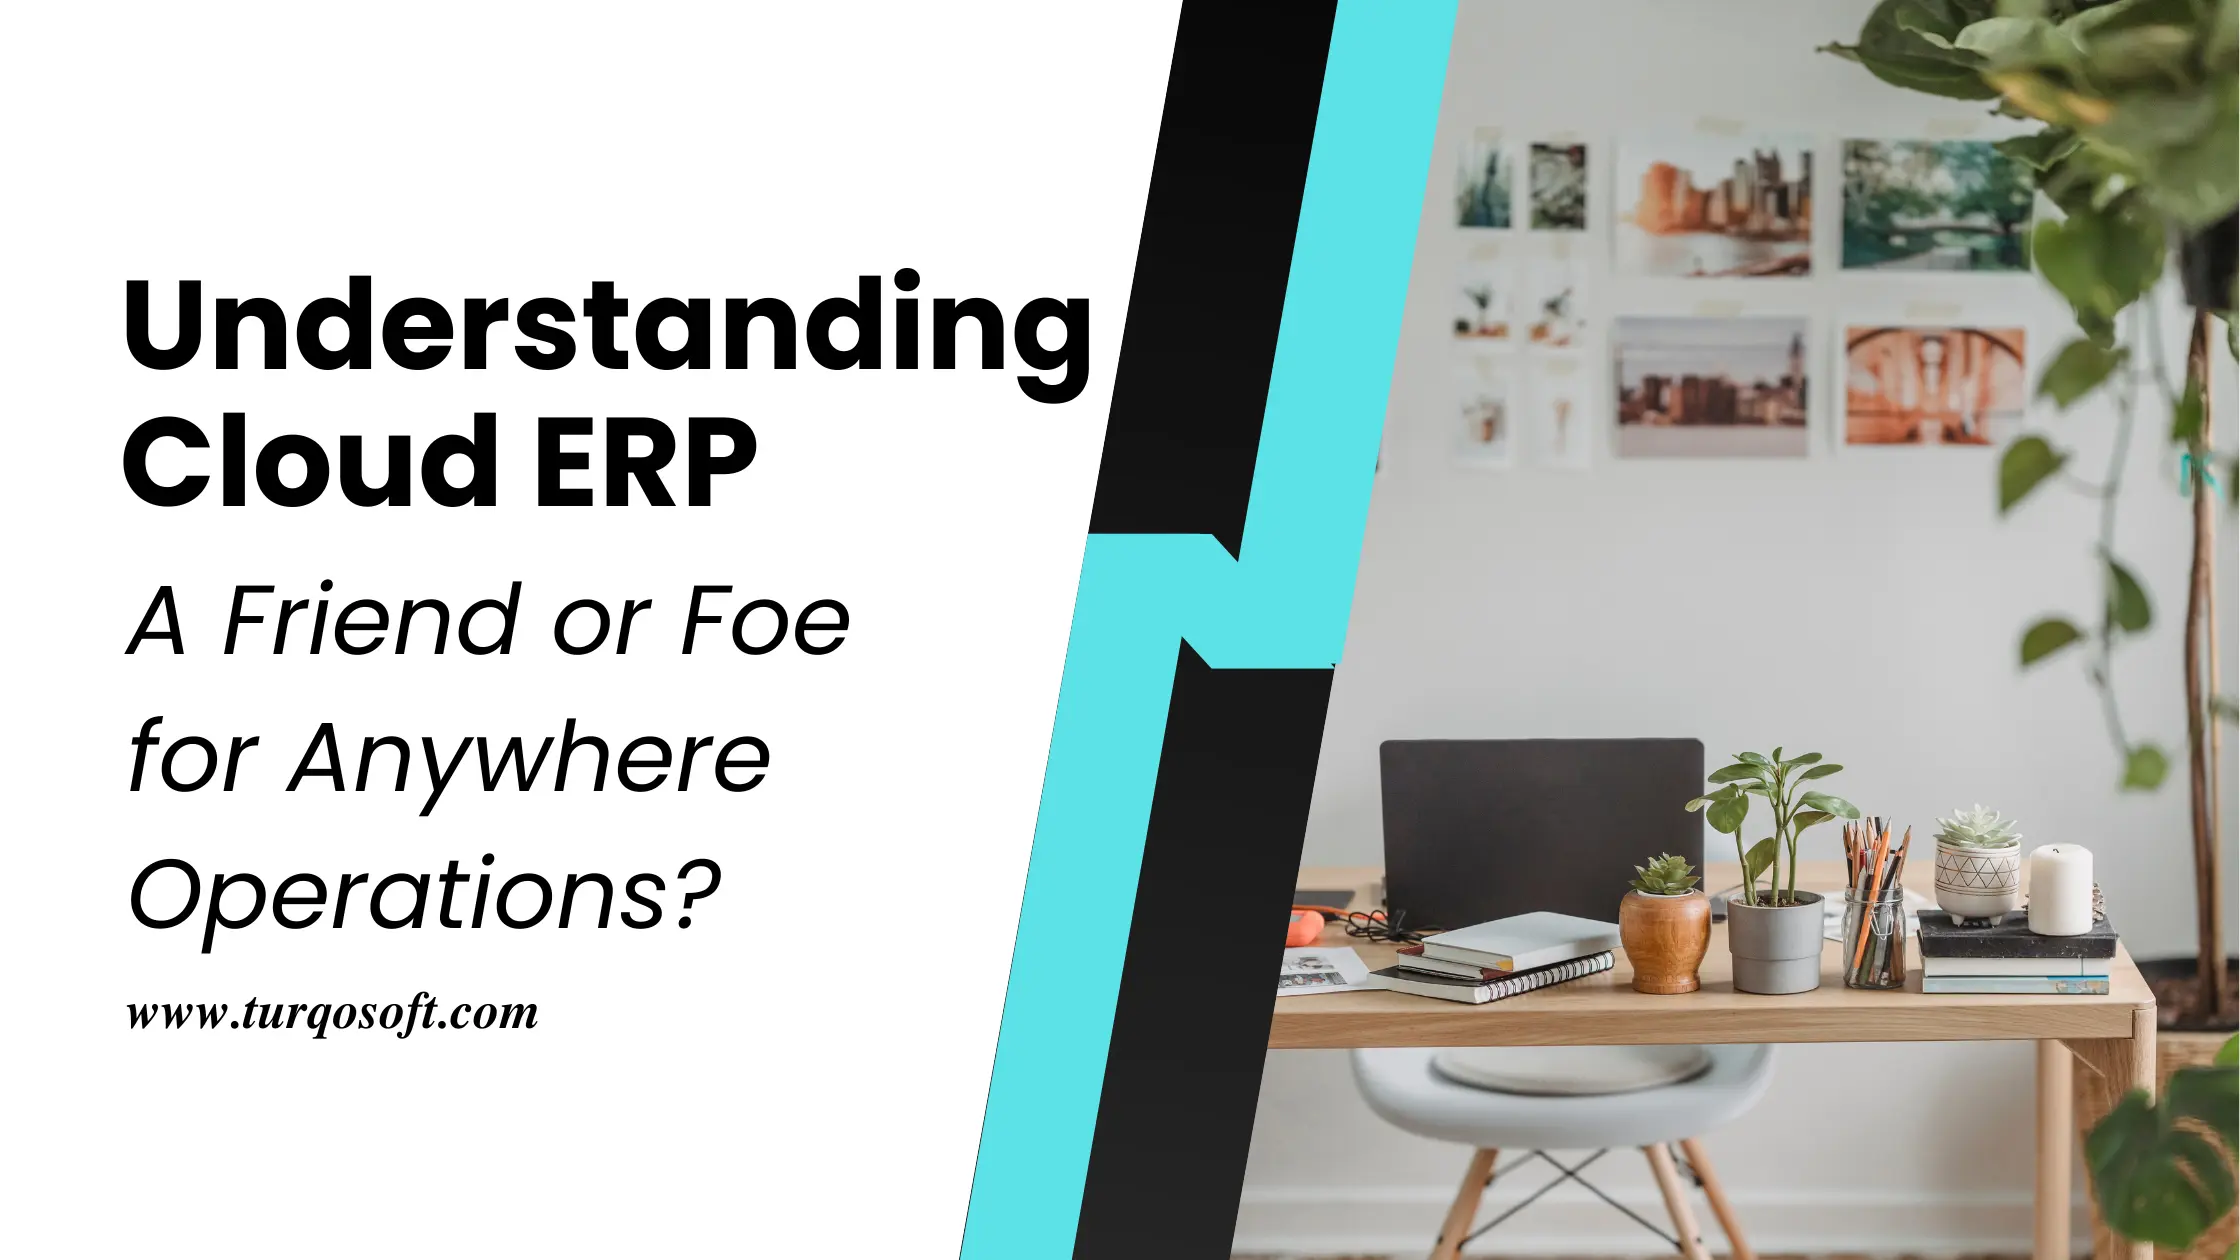 Understanding Cloud ERP: Friend or Foe for Anywhere Operations?